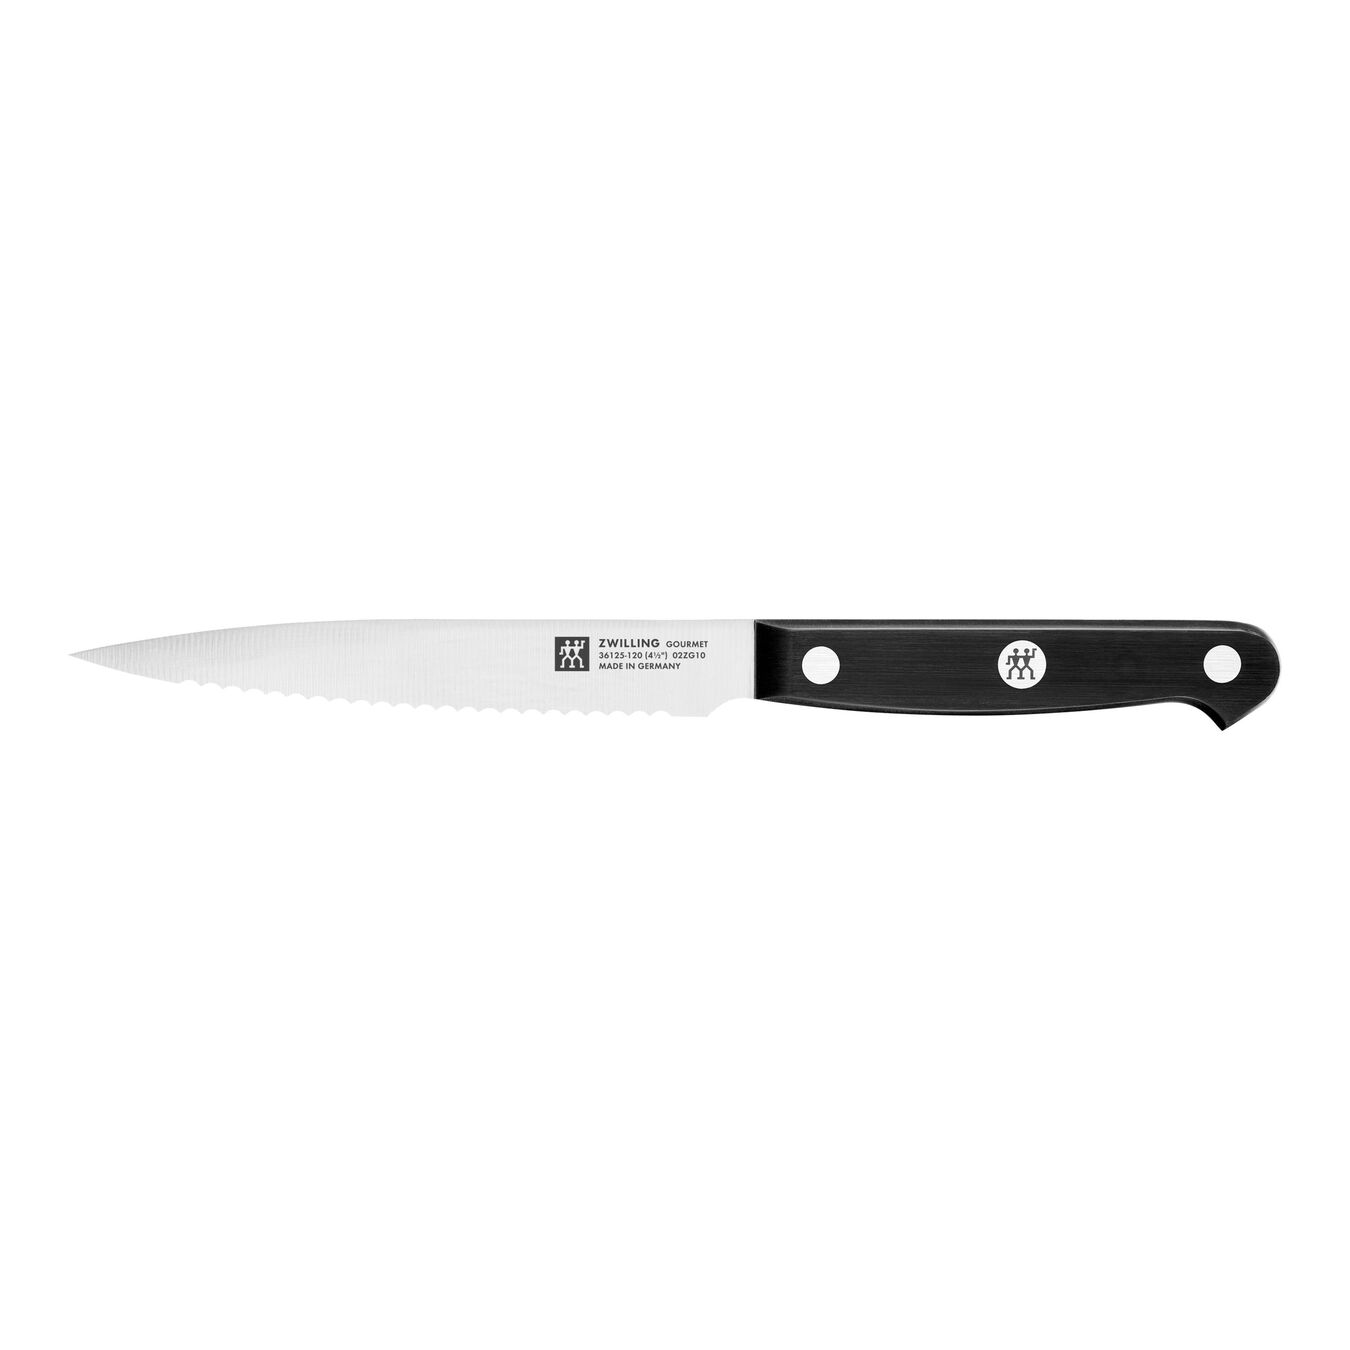 4.5-inch, Paring knife - Visual Imperfections,,large 1